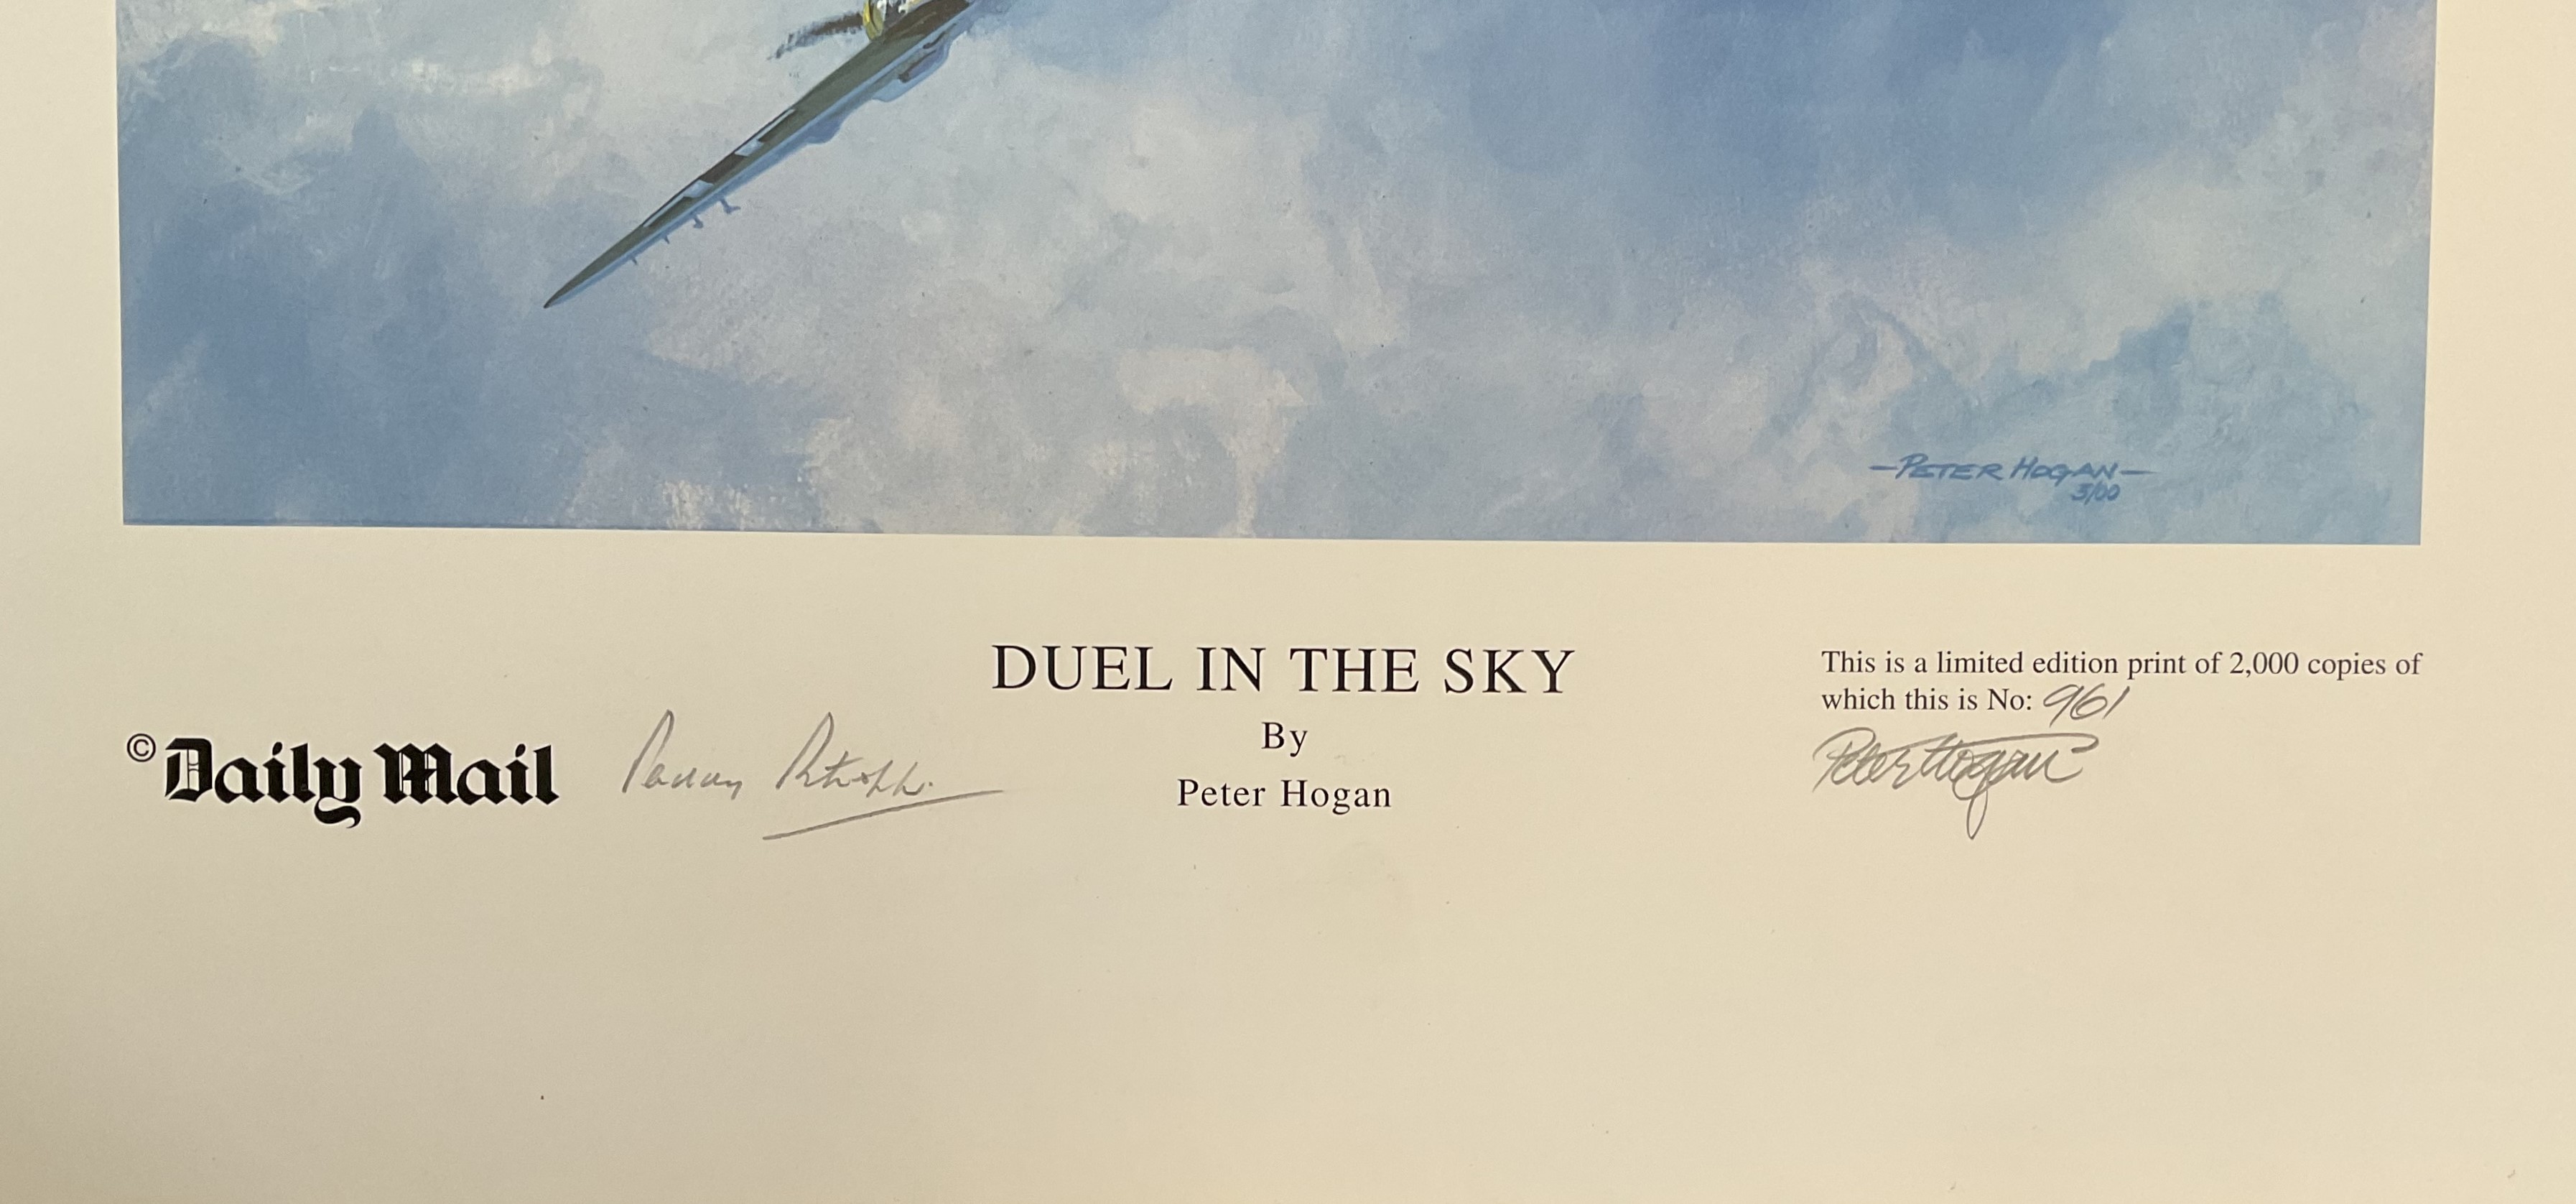 Wing Commander Paddy Barthropp and Artist Peter Hogan Signed Limited Edition Print Titled Duel in - Image 2 of 2